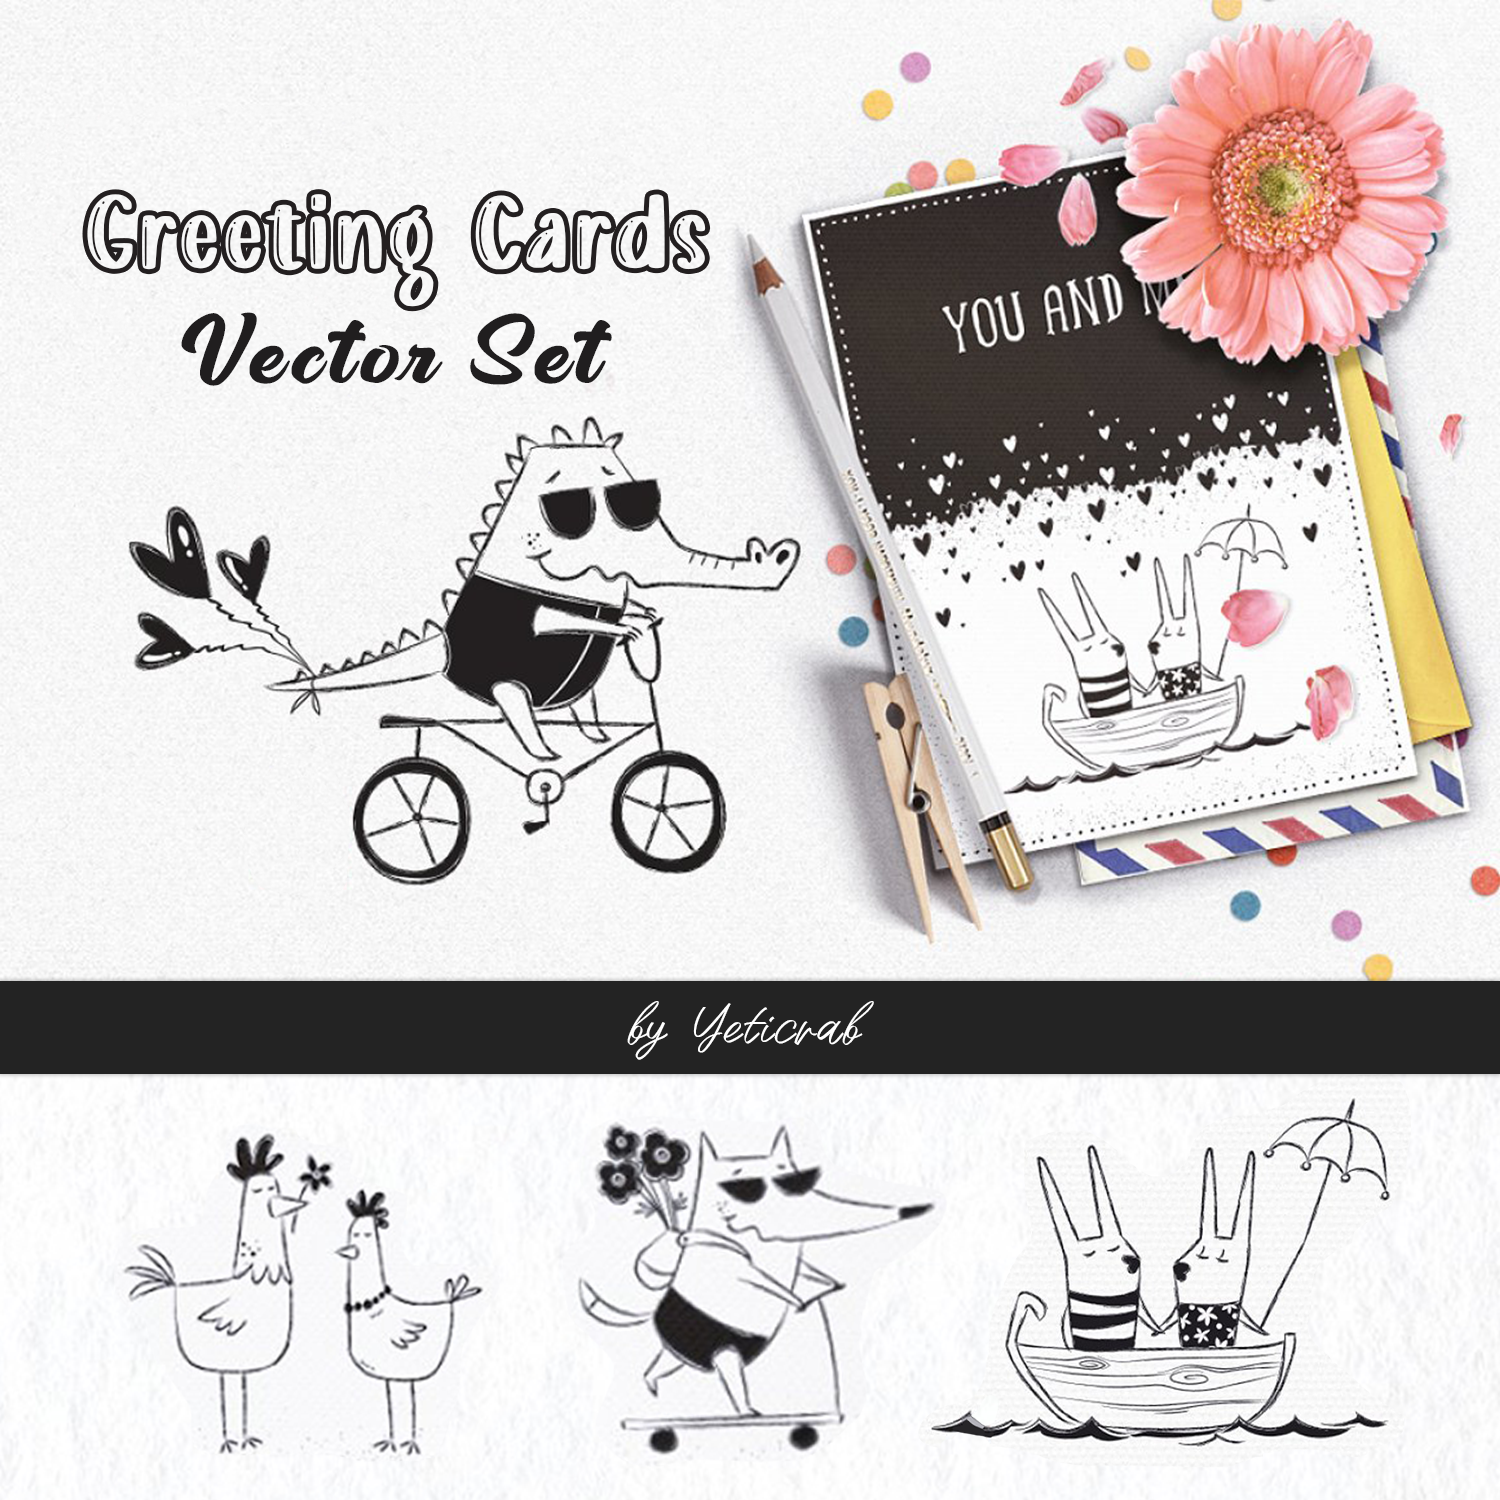 Preview greeting cards vector set.